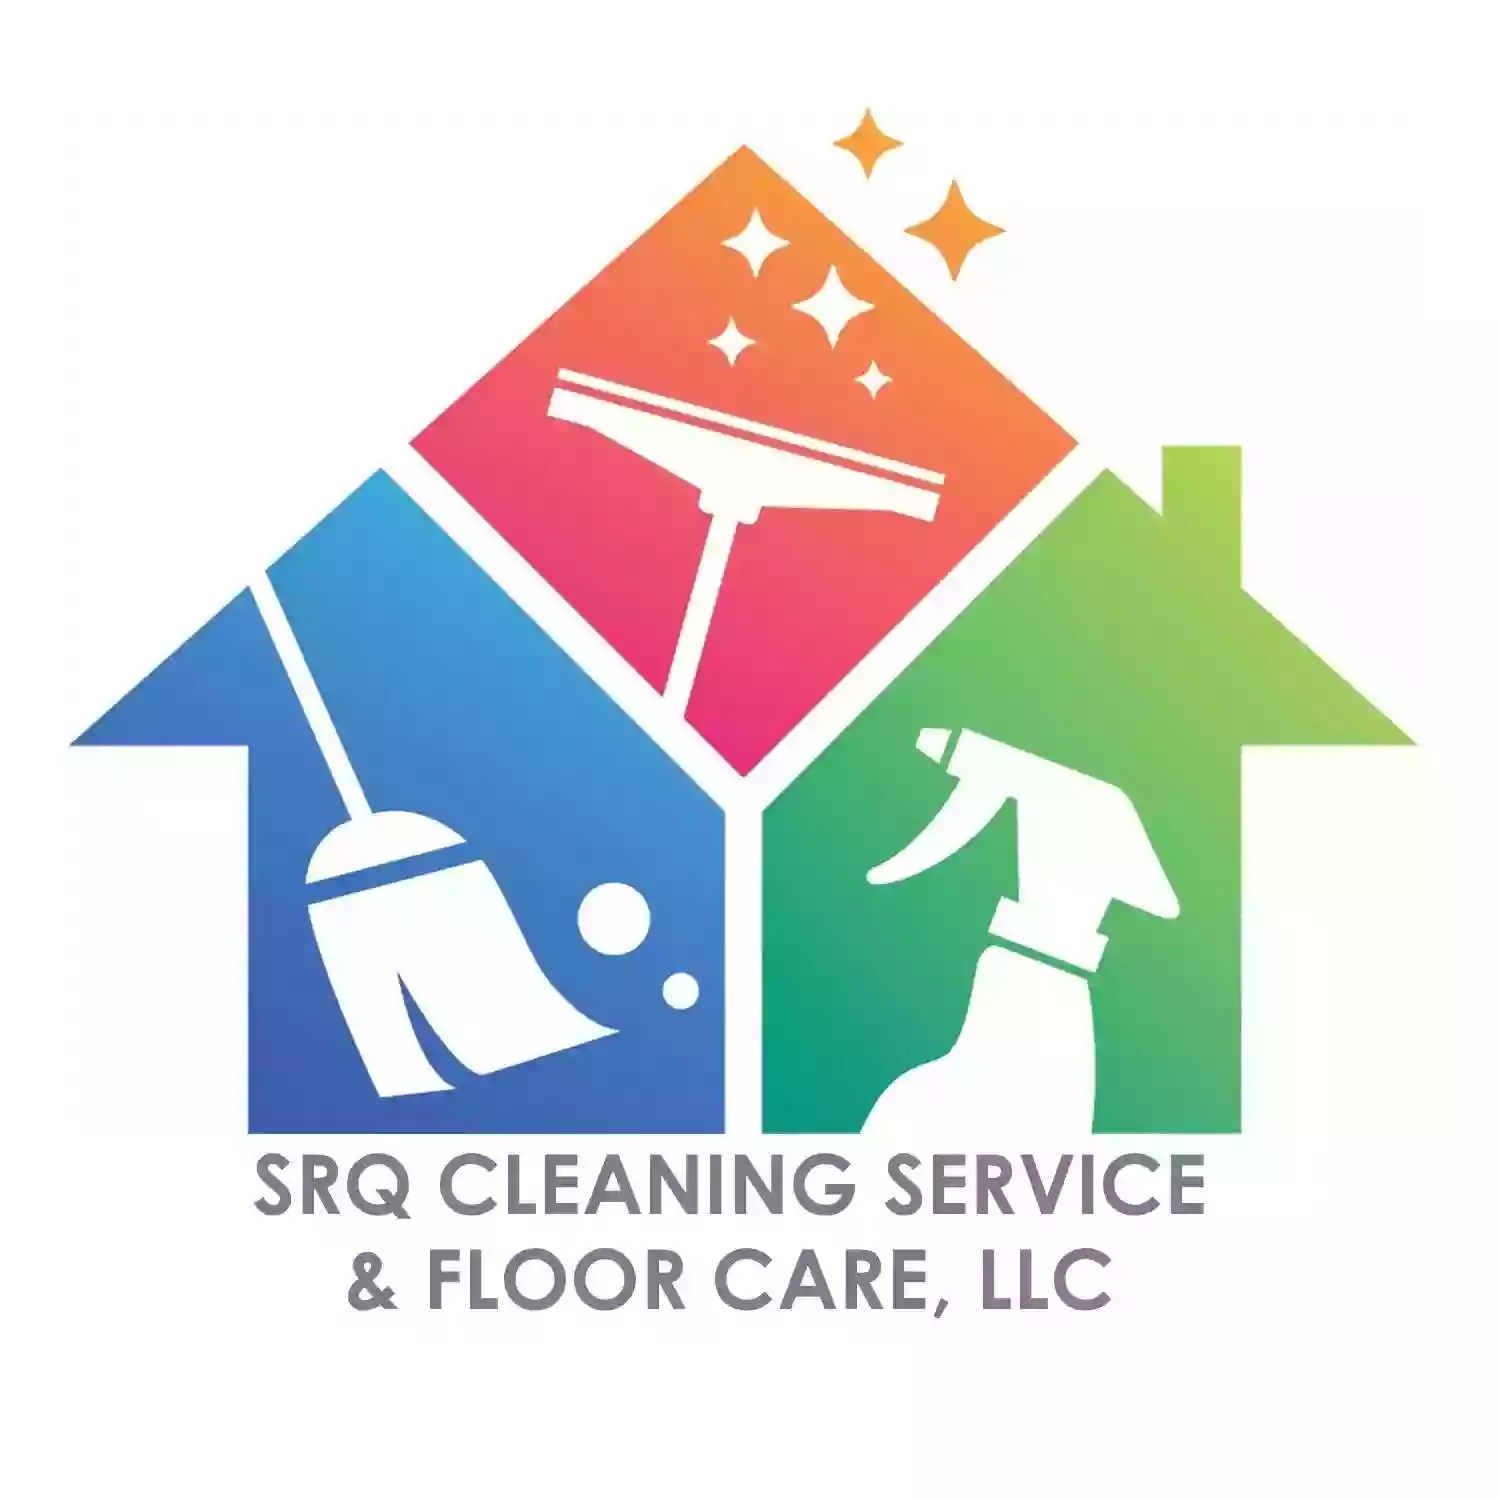 SRQ Cleaning Service and Floor Care llc